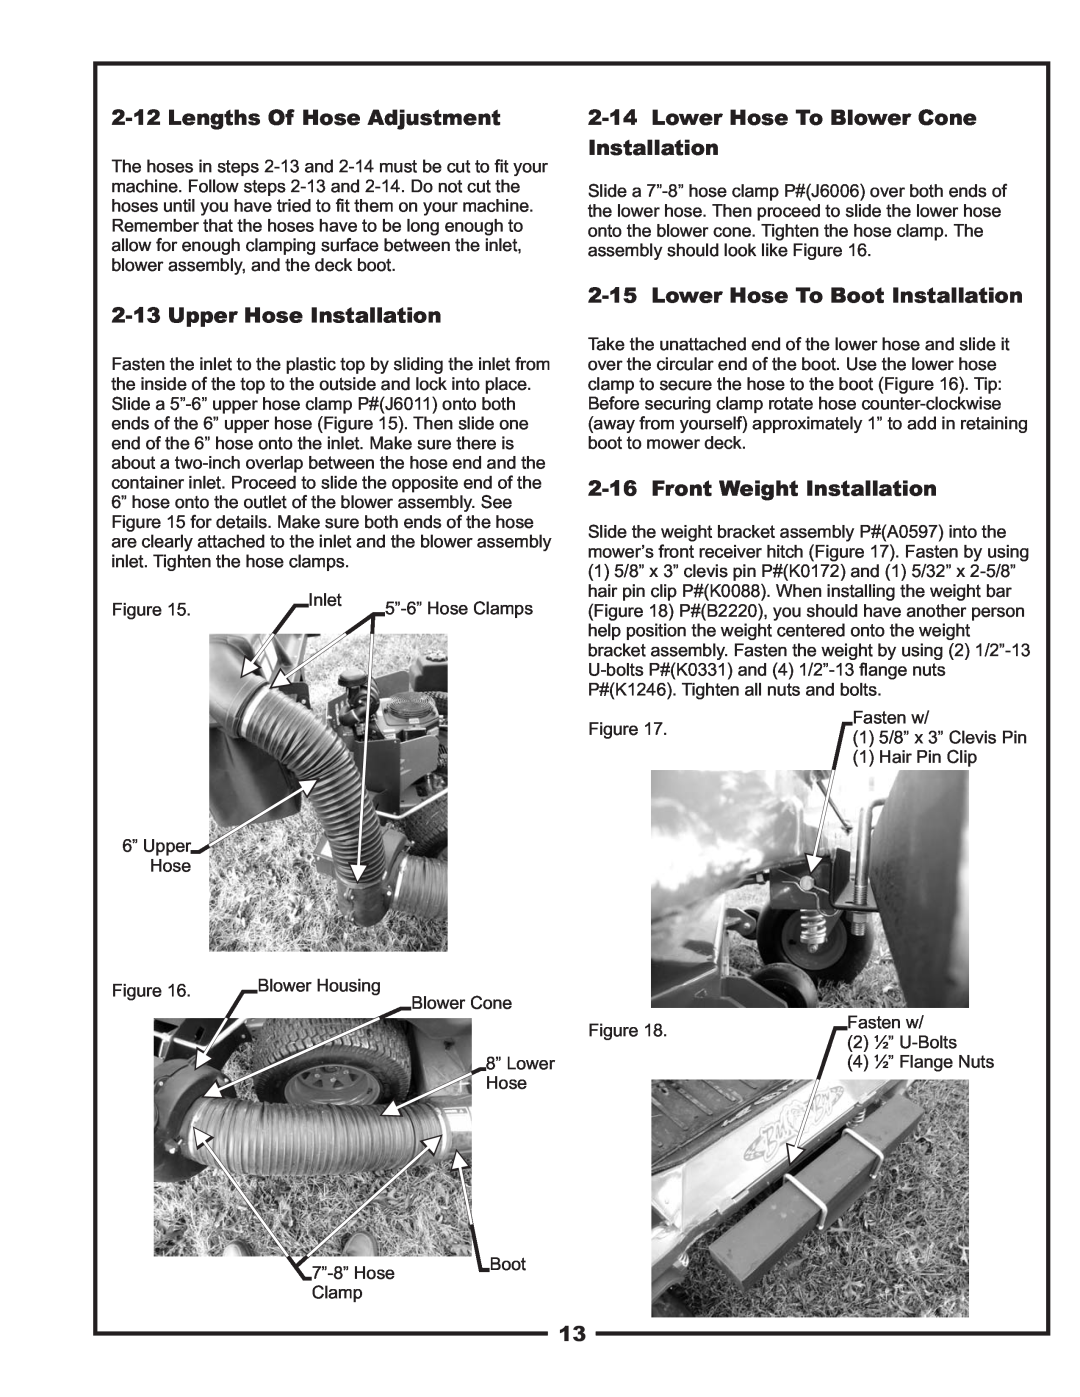 Bad Boy Mowers PUP Series Lengths Of Hose Adjustment, Upper Hose Installation, Lower Hose To Blower Cone Installation 